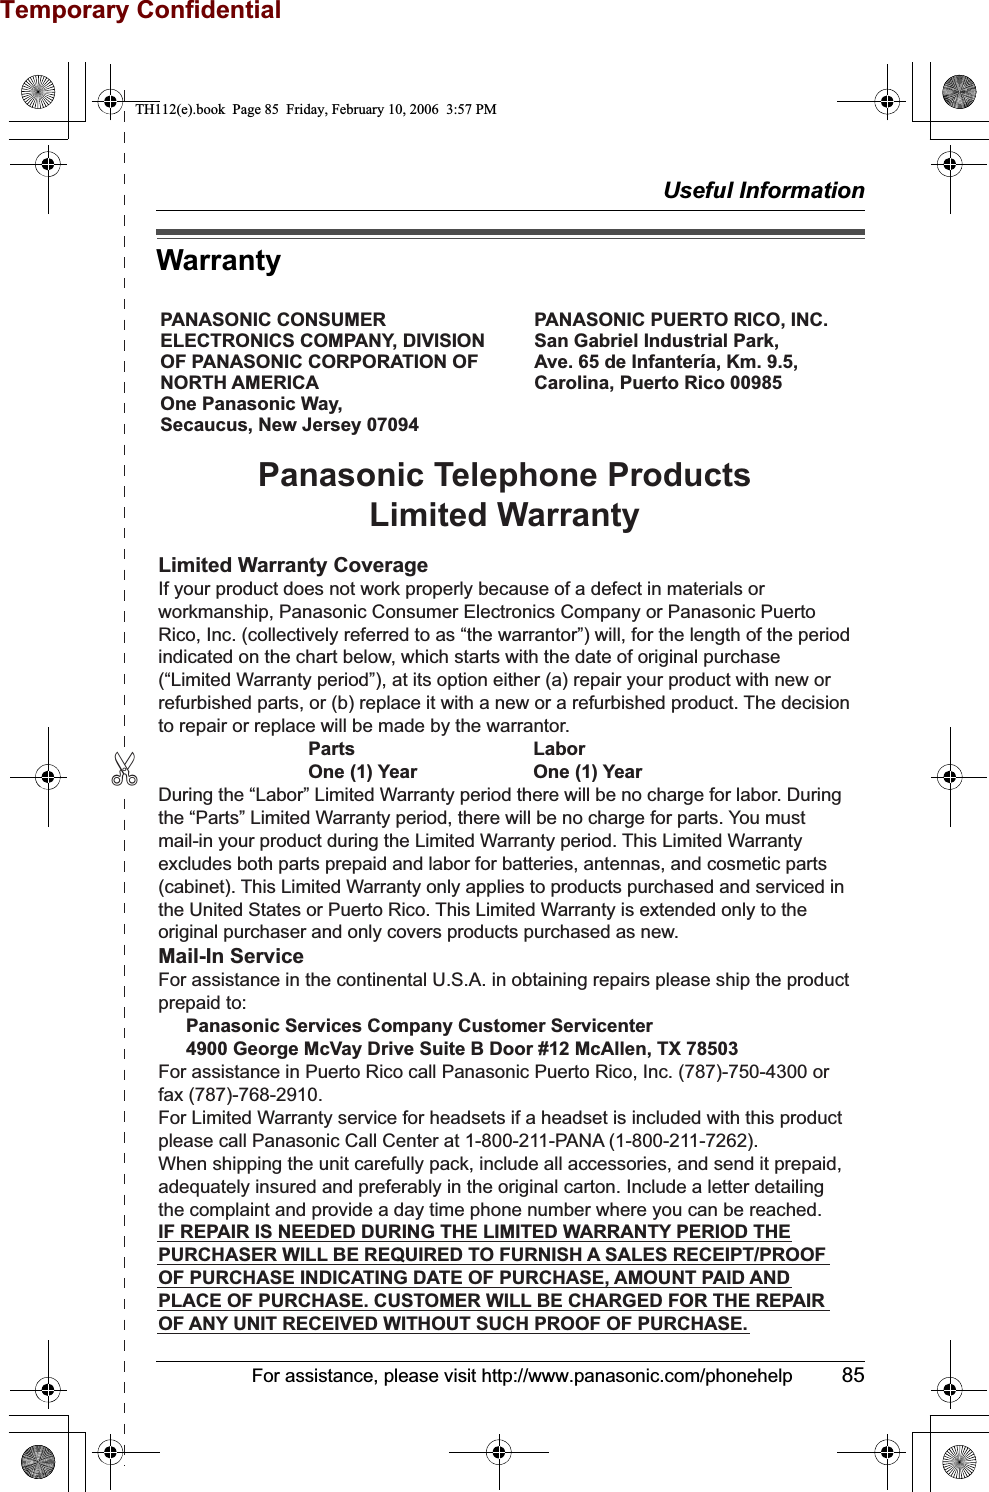 Temporary Confidential✄Useful InformationFor assistance, please visit http://www.panasonic.com/phonehelp 85WarrantyPANASONIC CONSUMER ELECTRONICS COMPANY, DIVISION OF PANASONIC CORPORATION OF NORTH AMERICA One Panasonic Way, Secaucus, New Jersey 07094PANASONIC PUERTO RICO, INC.San Gabriel Industrial Park, Ave. 65 de Infantería, Km. 9.5,Carolina, Puerto Rico 00985Panasonic Telephone ProductsLimited WarrantyLimited Warranty CoverageIf your product does not work properly because of a defect in materials or workmanship, Panasonic Consumer Electronics Company or Panasonic Puerto Rico, Inc. (collectively referred to as “the warrantor”) will, for the length of the period indicated on the chart below, which starts with the date of original purchase (“Limited Warranty period”), at its option either (a) repair your product with new or refurbished parts, or (b) replace it with a new or a refurbished product. The decision to repair or replace will be made by the warrantor.     Parts       Labor     One (1) Year    One (1) YearDuring the “Labor” Limited Warranty period there will be no charge for labor. During the “Parts” Limited Warranty period, there will be no charge for parts. You must mail-in your product during the Limited Warranty period. This Limited Warranty excludes both parts prepaid and labor for batteries, antennas, and cosmetic parts (cabinet). This Limited Warranty only applies to products purchased and serviced in the United States or Puerto Rico. This Limited Warranty is extended only to the original purchaser and only covers products purchased as new.Mail-In ServiceFor assistance in the continental U.S.A. in obtaining repairs please ship the product prepaid to:  Panasonic Services Company Customer Servicenter  4900 George McVay Drive Suite B Door #12 McAllen, TX 78503For assistance in Puerto Rico call Panasonic Puerto Rico, Inc. (787)-750-4300 or fax (787)-768-2910.For Limited Warranty service for headsets if a headset is included with this product please call Panasonic Call Center at 1-800-211-PANA (1-800-211-7262).When shipping the unit carefully pack, include all accessories, and send it prepaid, adequately insured and preferably in the original carton. Include a letter detailing the complaint and provide a day time phone number where you can be reached.IF REPAIR IS NEEDED DURING THE LIMITED WARRANTY PERIOD THE PURCHASER WILL BE REQUIRED TO FURNISH A SALES RECEIPT/PROOF OF PURCHASE INDICATING DATE OF PURCHASE, AMOUNT PAID AND PLACE OF PURCHASE. CUSTOMER WILL BE CHARGED FOR THE REPAIR OF ANY UNIT RECEIVED WITHOUT SUCH PROOF OF PURCHASE.TH112(e).book  Page 85  Friday, February 10, 2006  3:57 PM